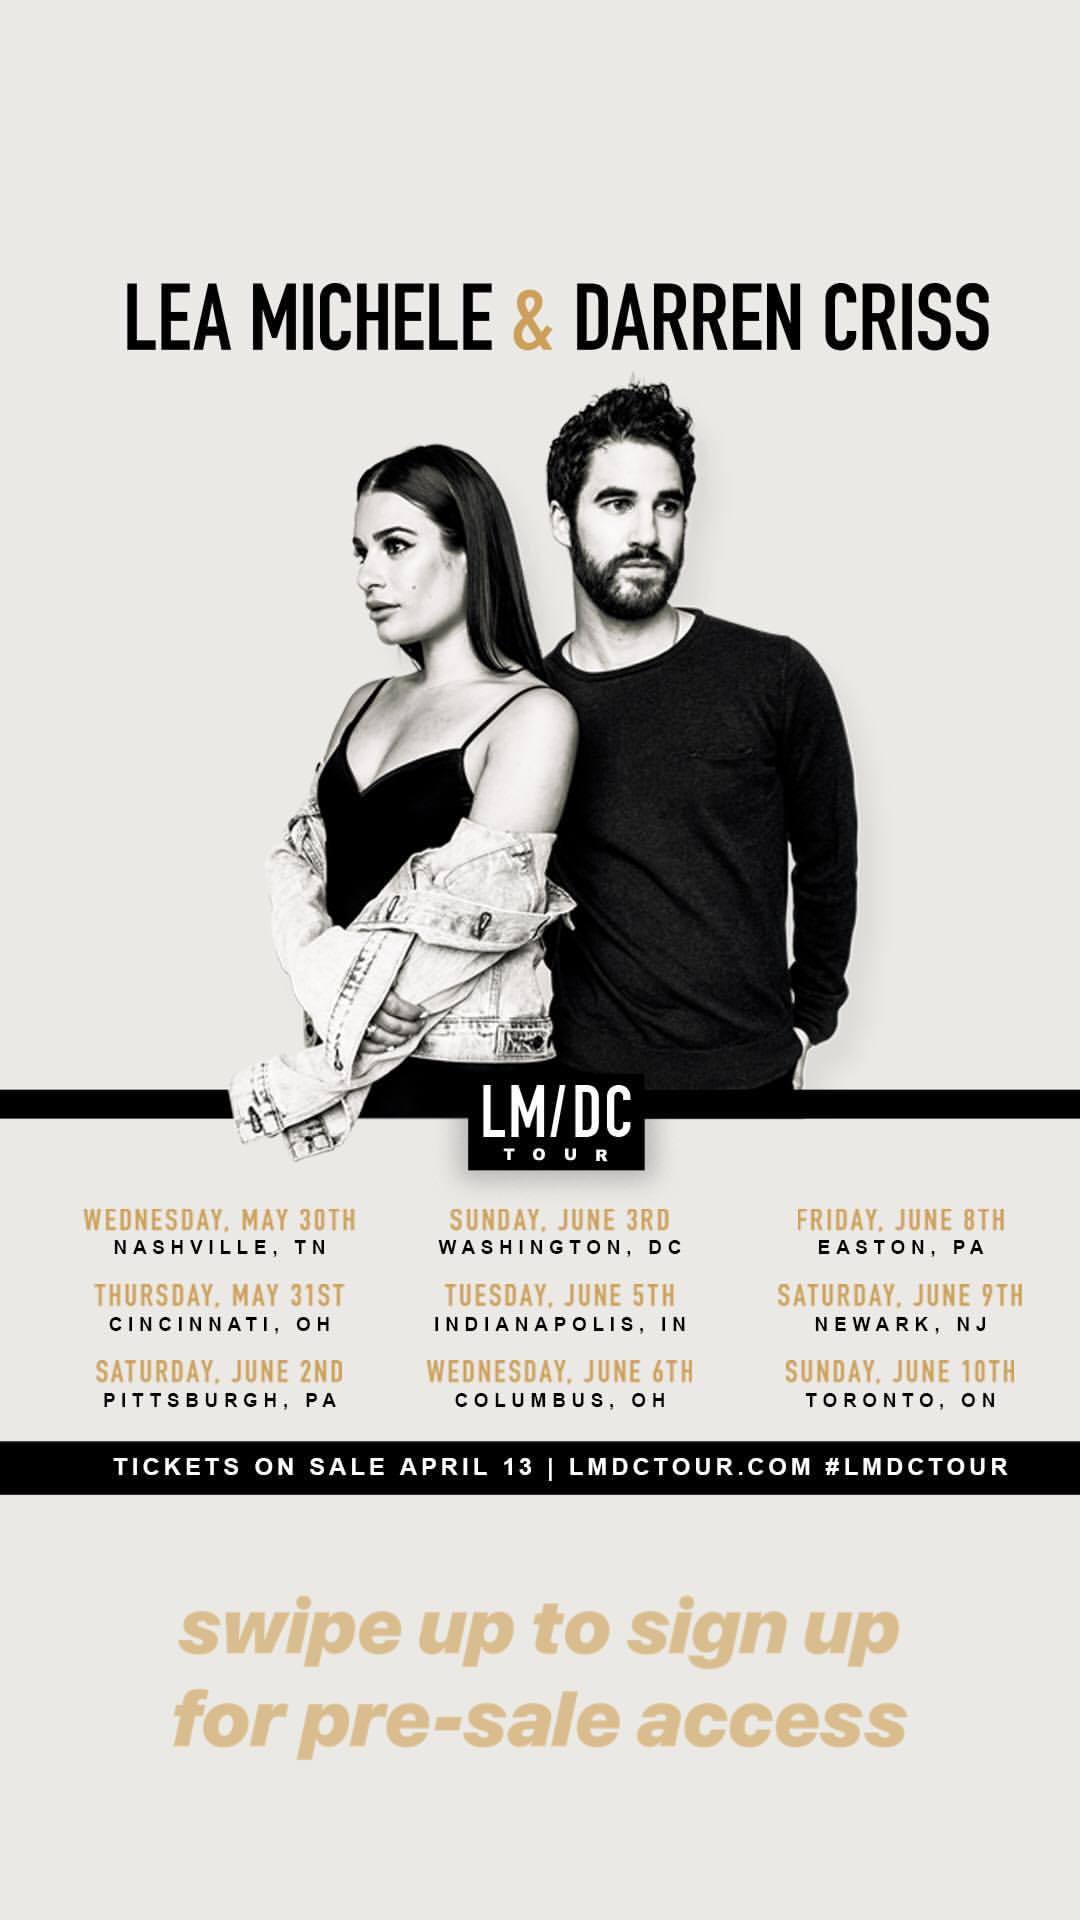 LMDCtour - Darren's Concerts and Other Musical Performancs for 2018 - Page 2 Tumblr_p6xvxlchIe1wpi2k2o1_1280